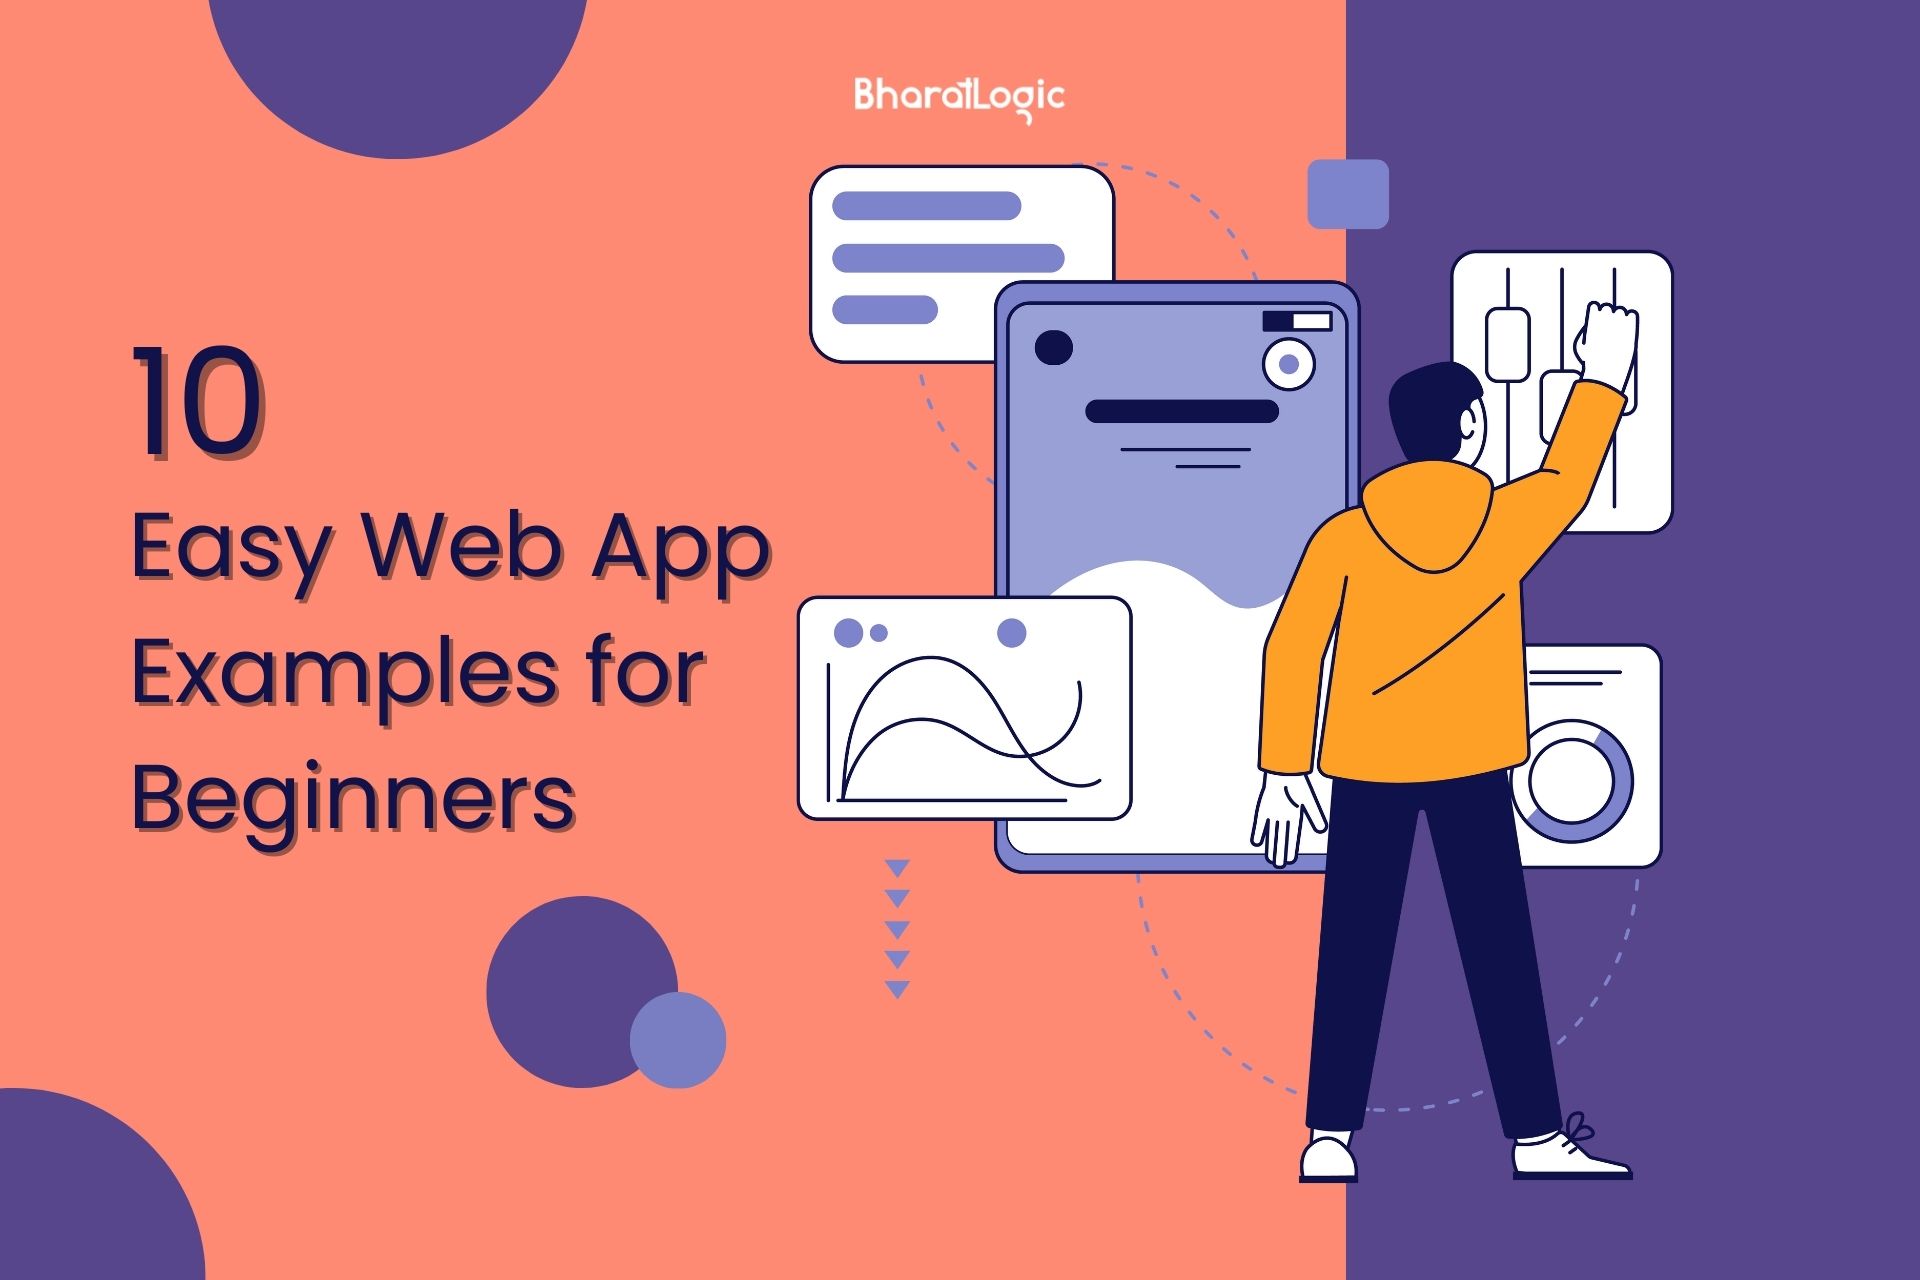 10 Easy Web App Examples for Beginners